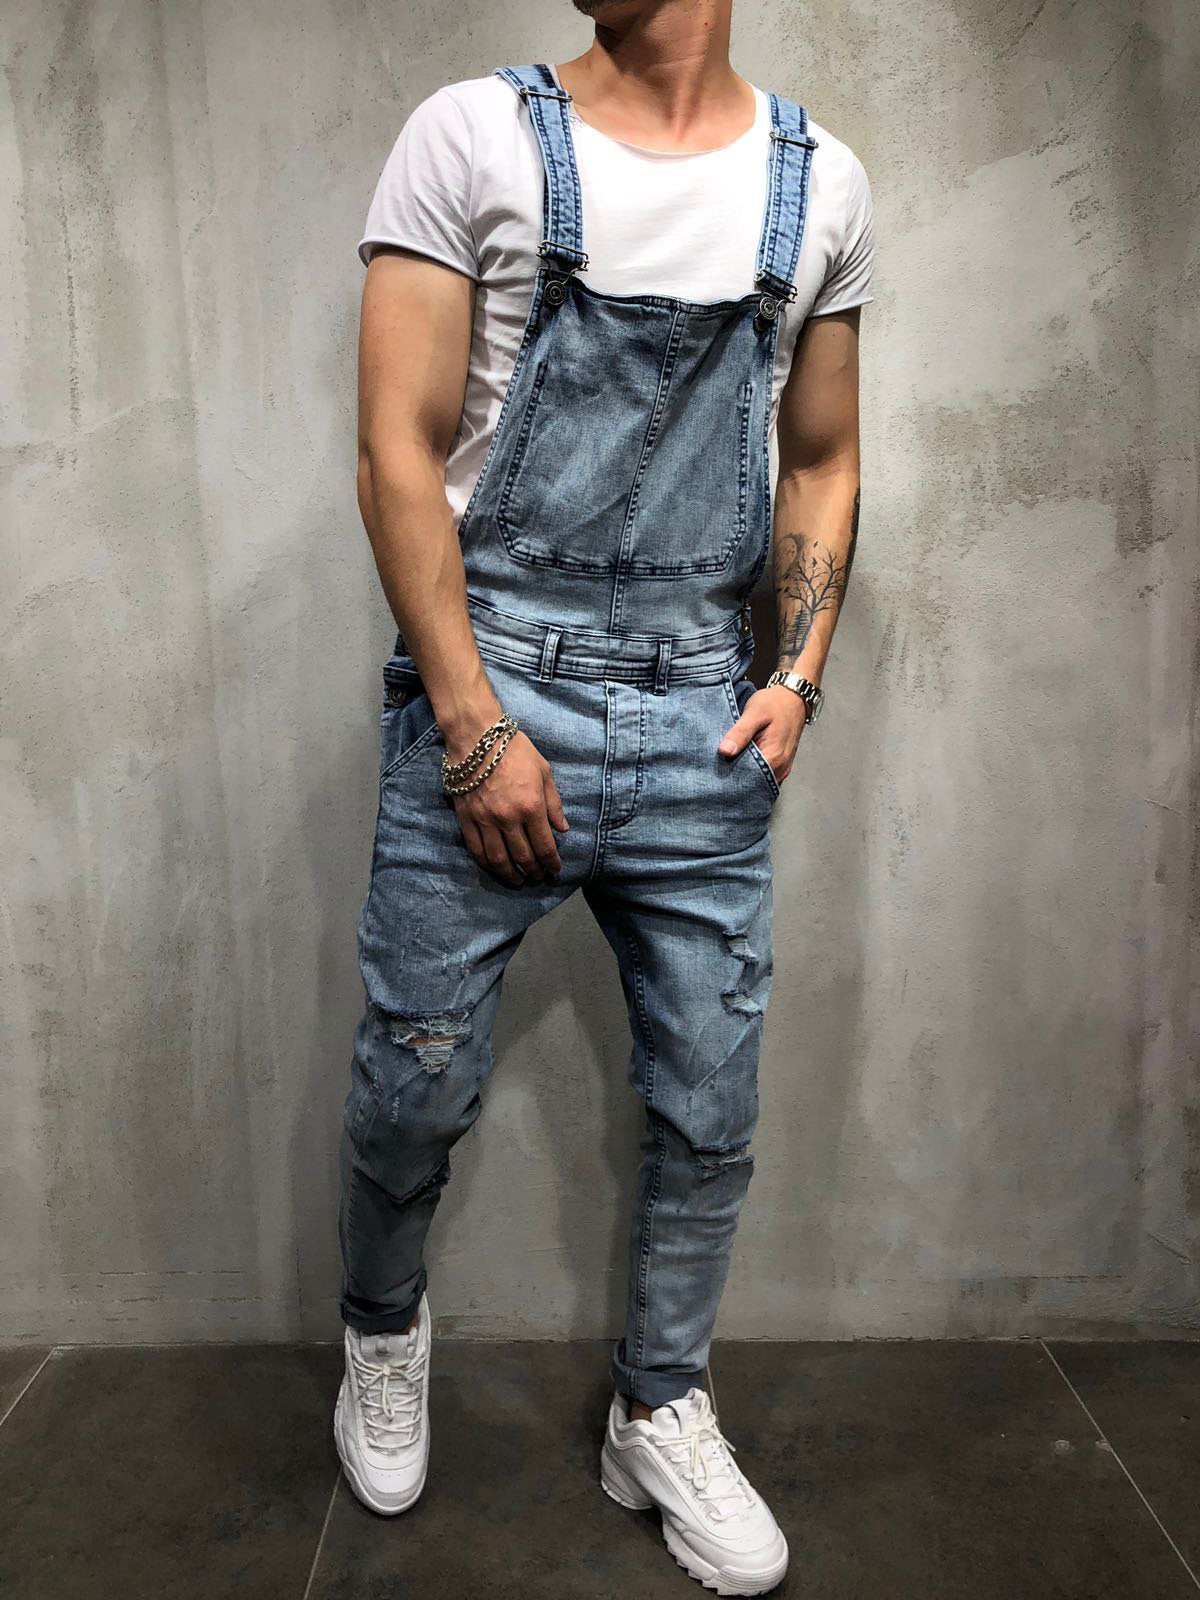 Men'S Jeans With Suspenders And Pants